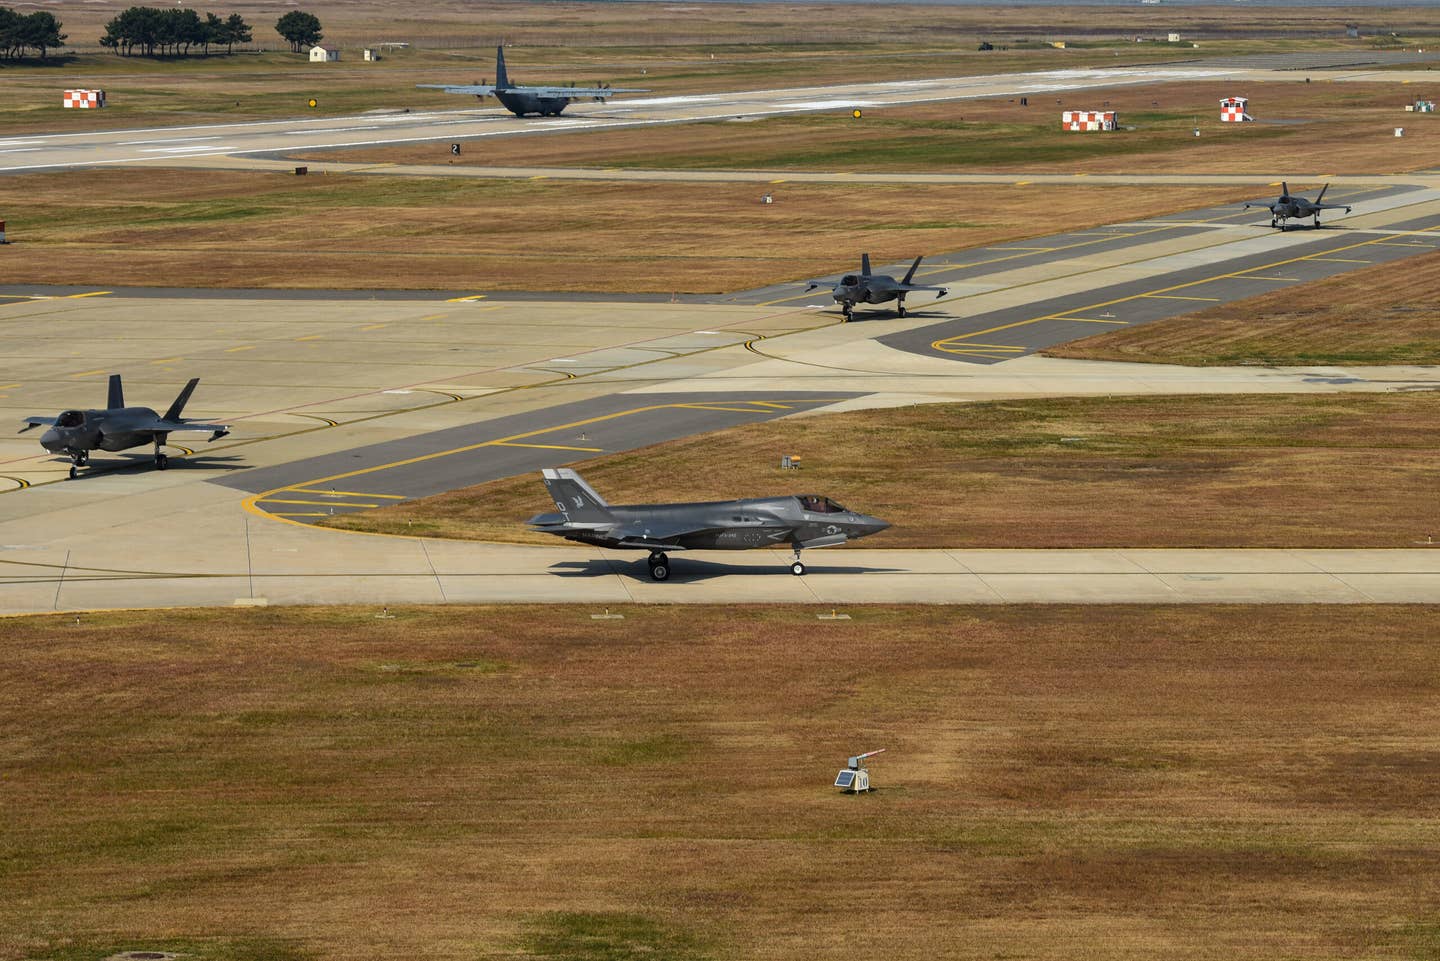 Four U.S. Marine Corps F-35B taxi down the flight line at Kunsan Air Base, South Korea, October 31, 2022. The aircraft traveled to Kunsan as a part of the Vigilant Storm training event. <em>U.S. Air Force photo by Tech. Sgt. Timothy Dischinat</em>